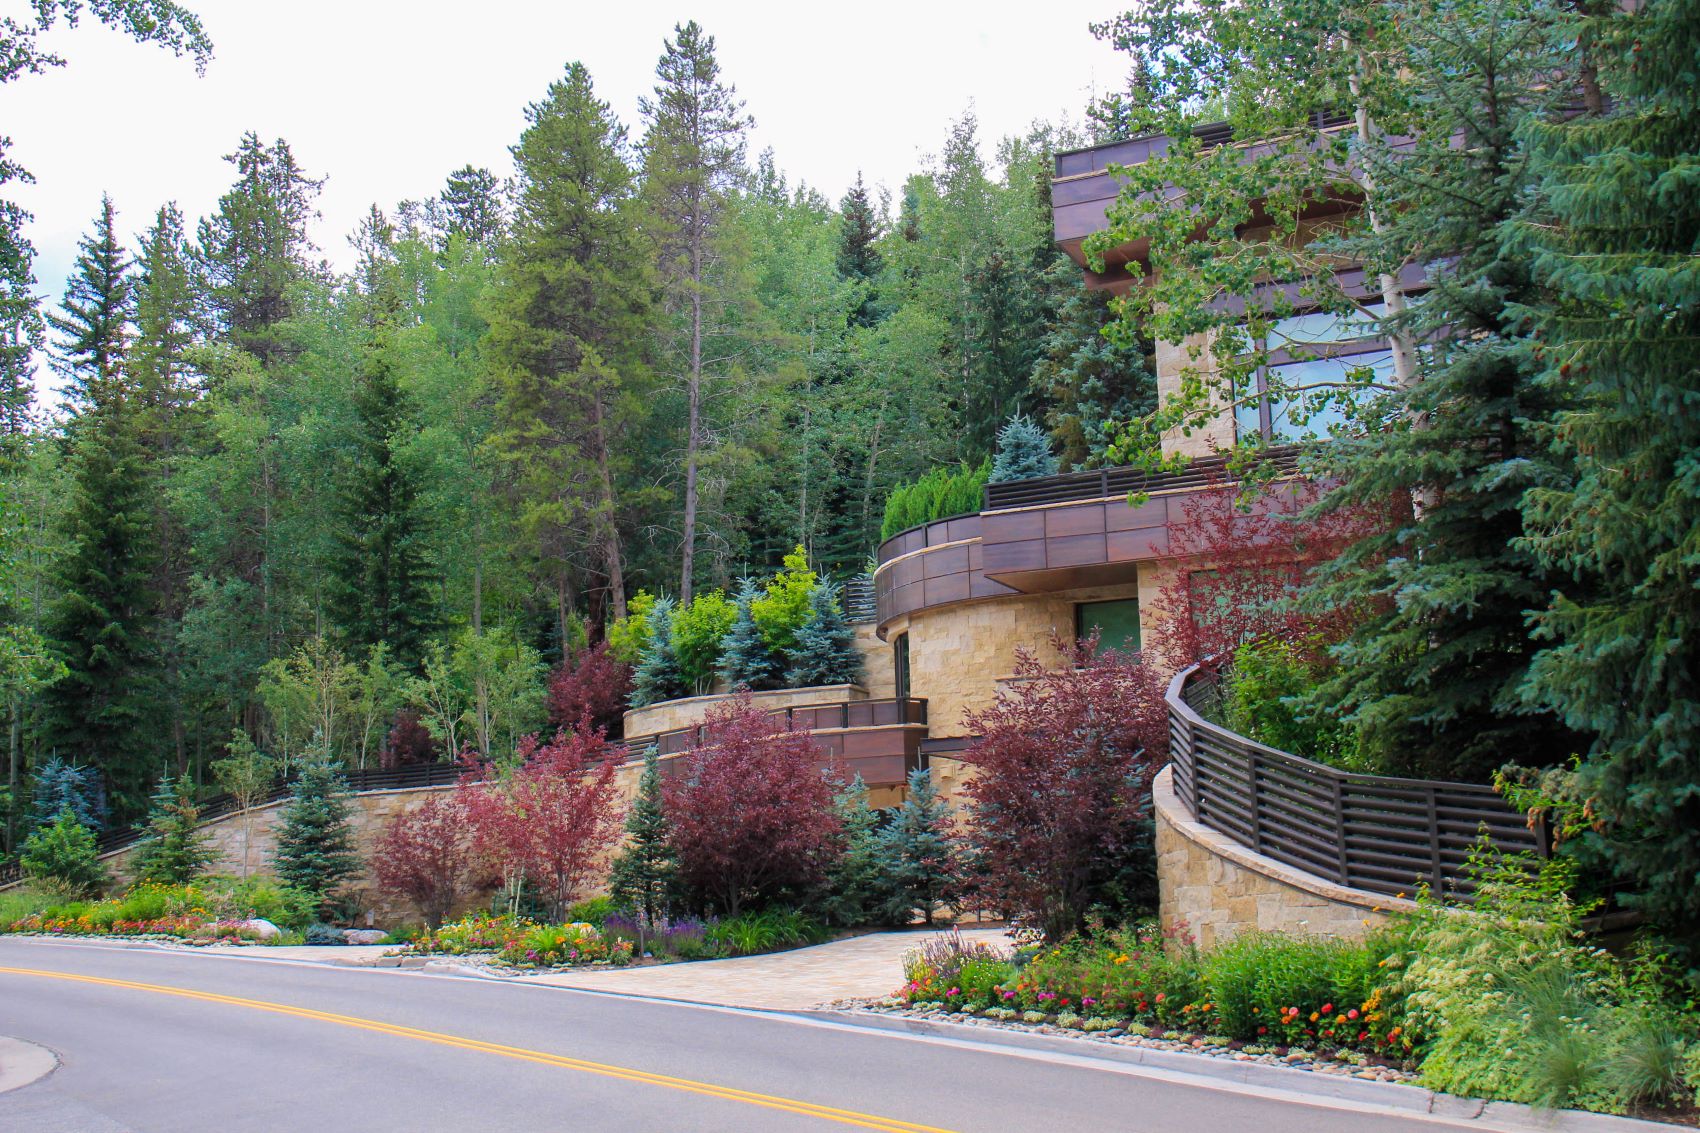 This image shows a modern building with curved architecture nestled among tall evergreen trees, with landscaped gardens along a paved road.